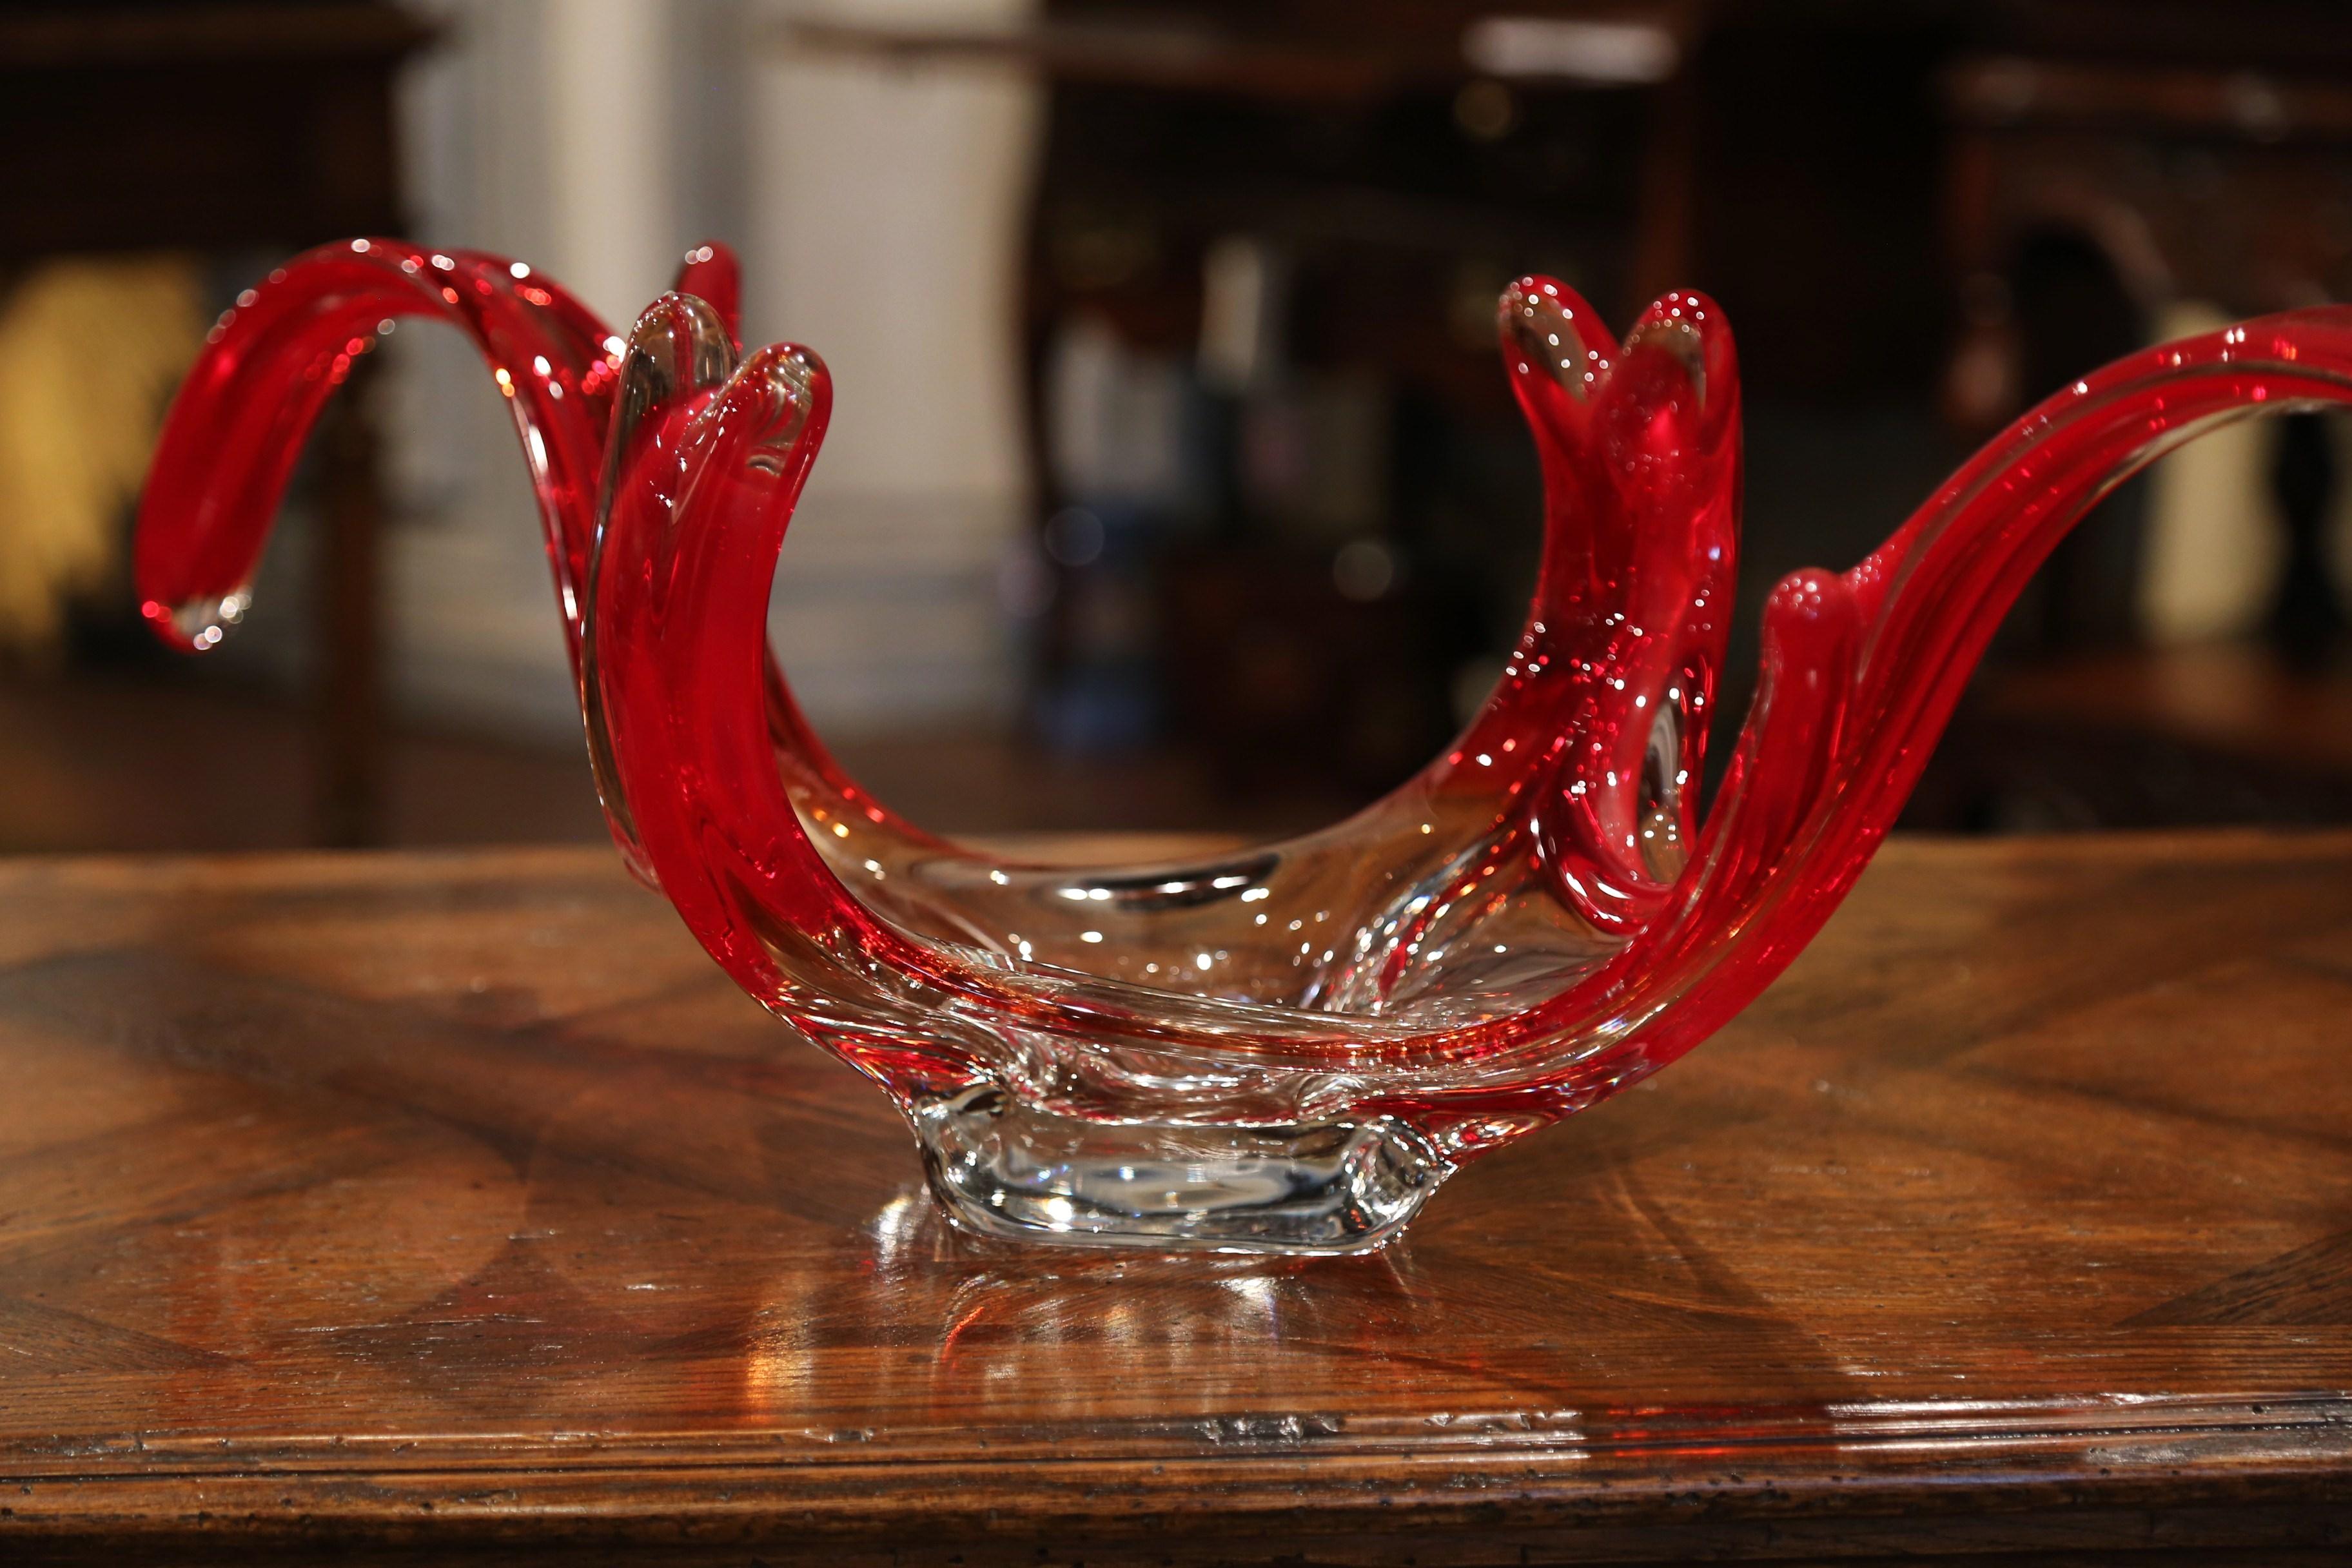 20th Century Midcentury Italian Pulled Feathered Two-Tone Red Murano Glass Center Vase